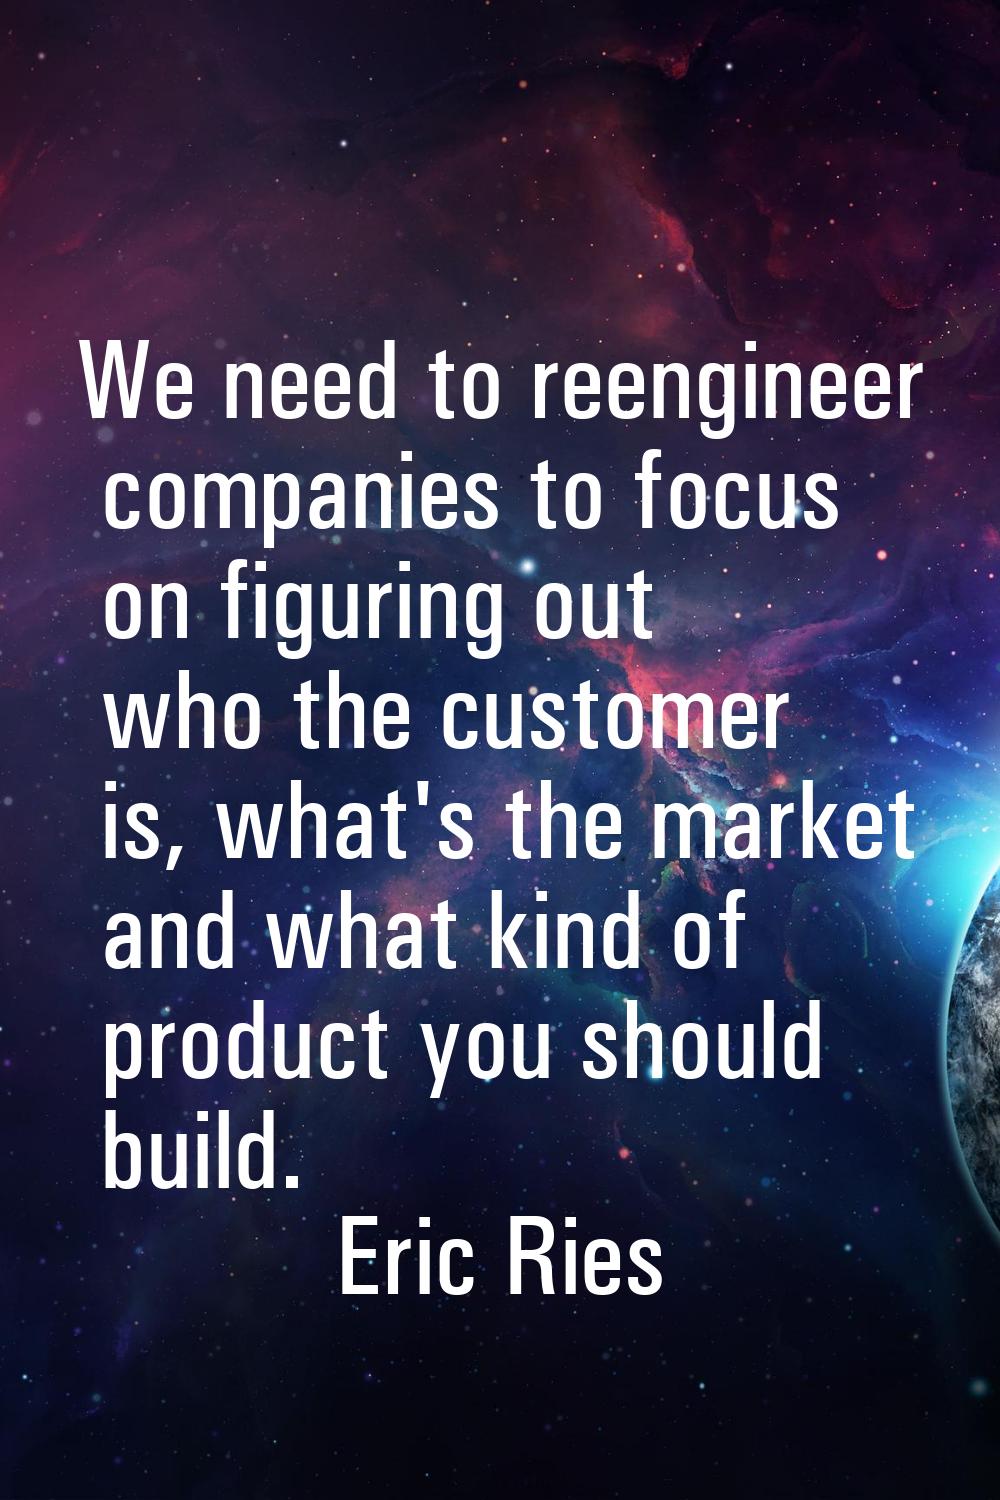 We need to reengineer companies to focus on figuring out who the customer is, what's the market and